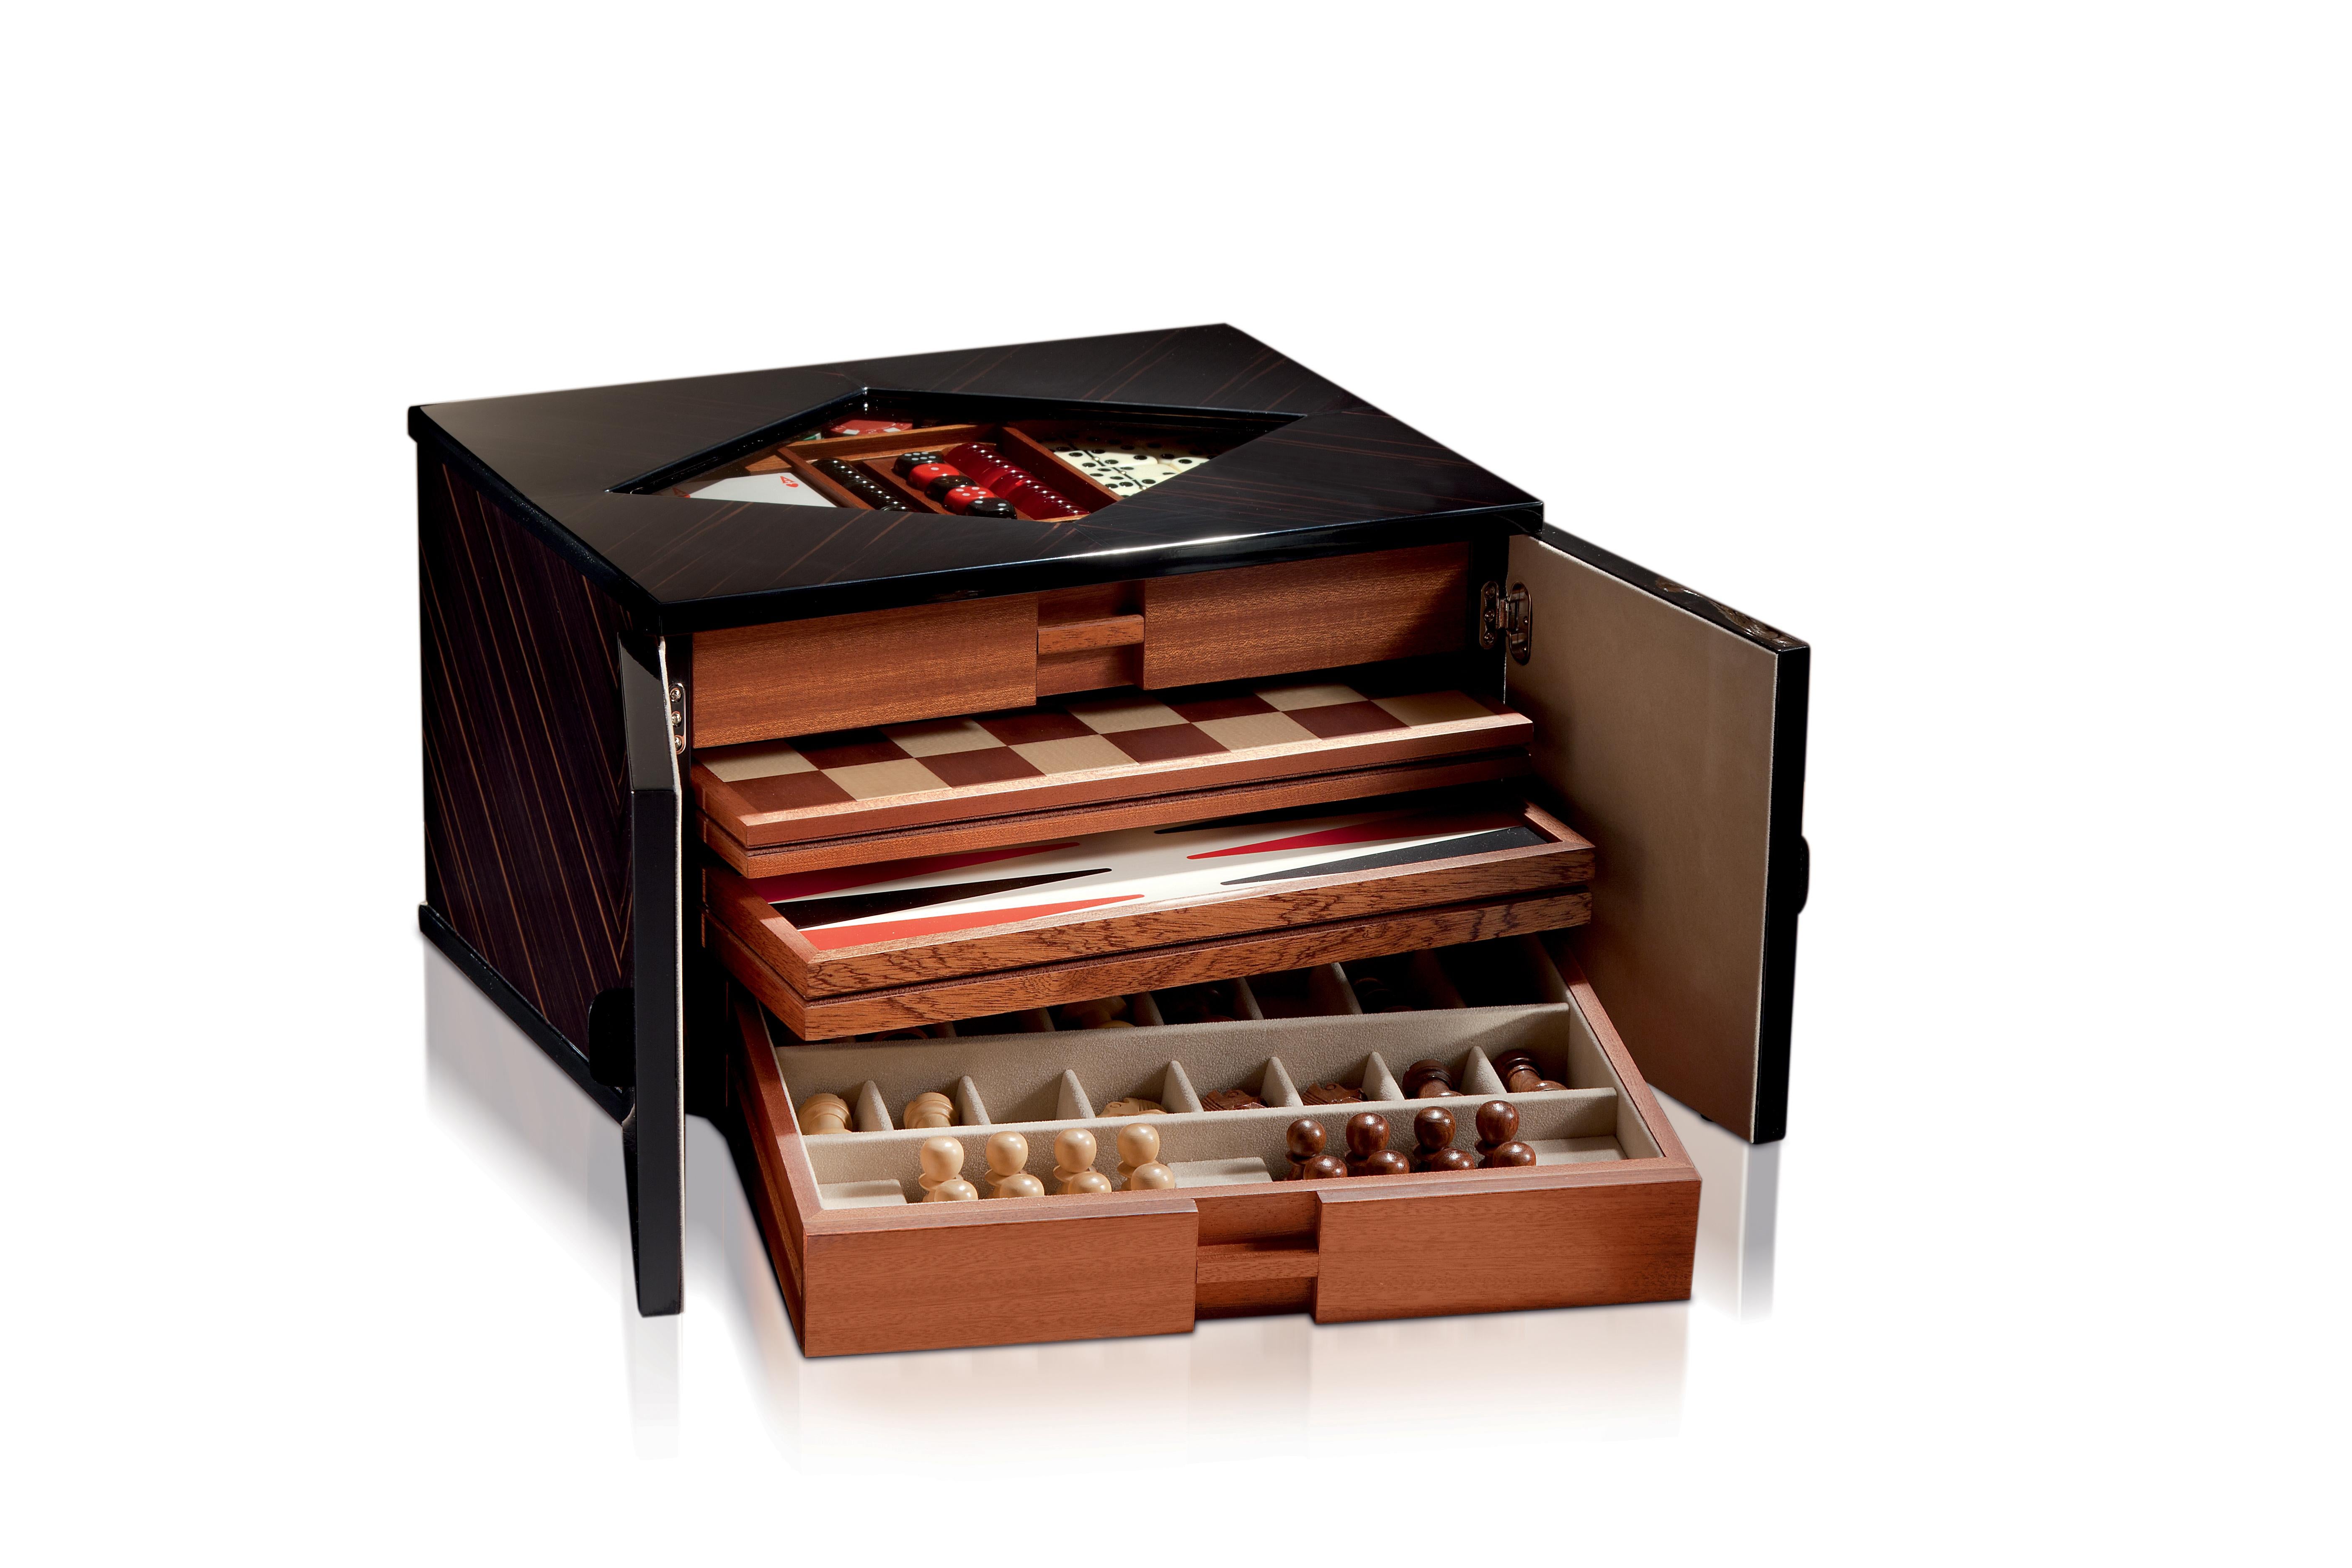 Polished ebony multigame. Contents chess, backgammon, dice, domino, playing cards and poker chips.
 